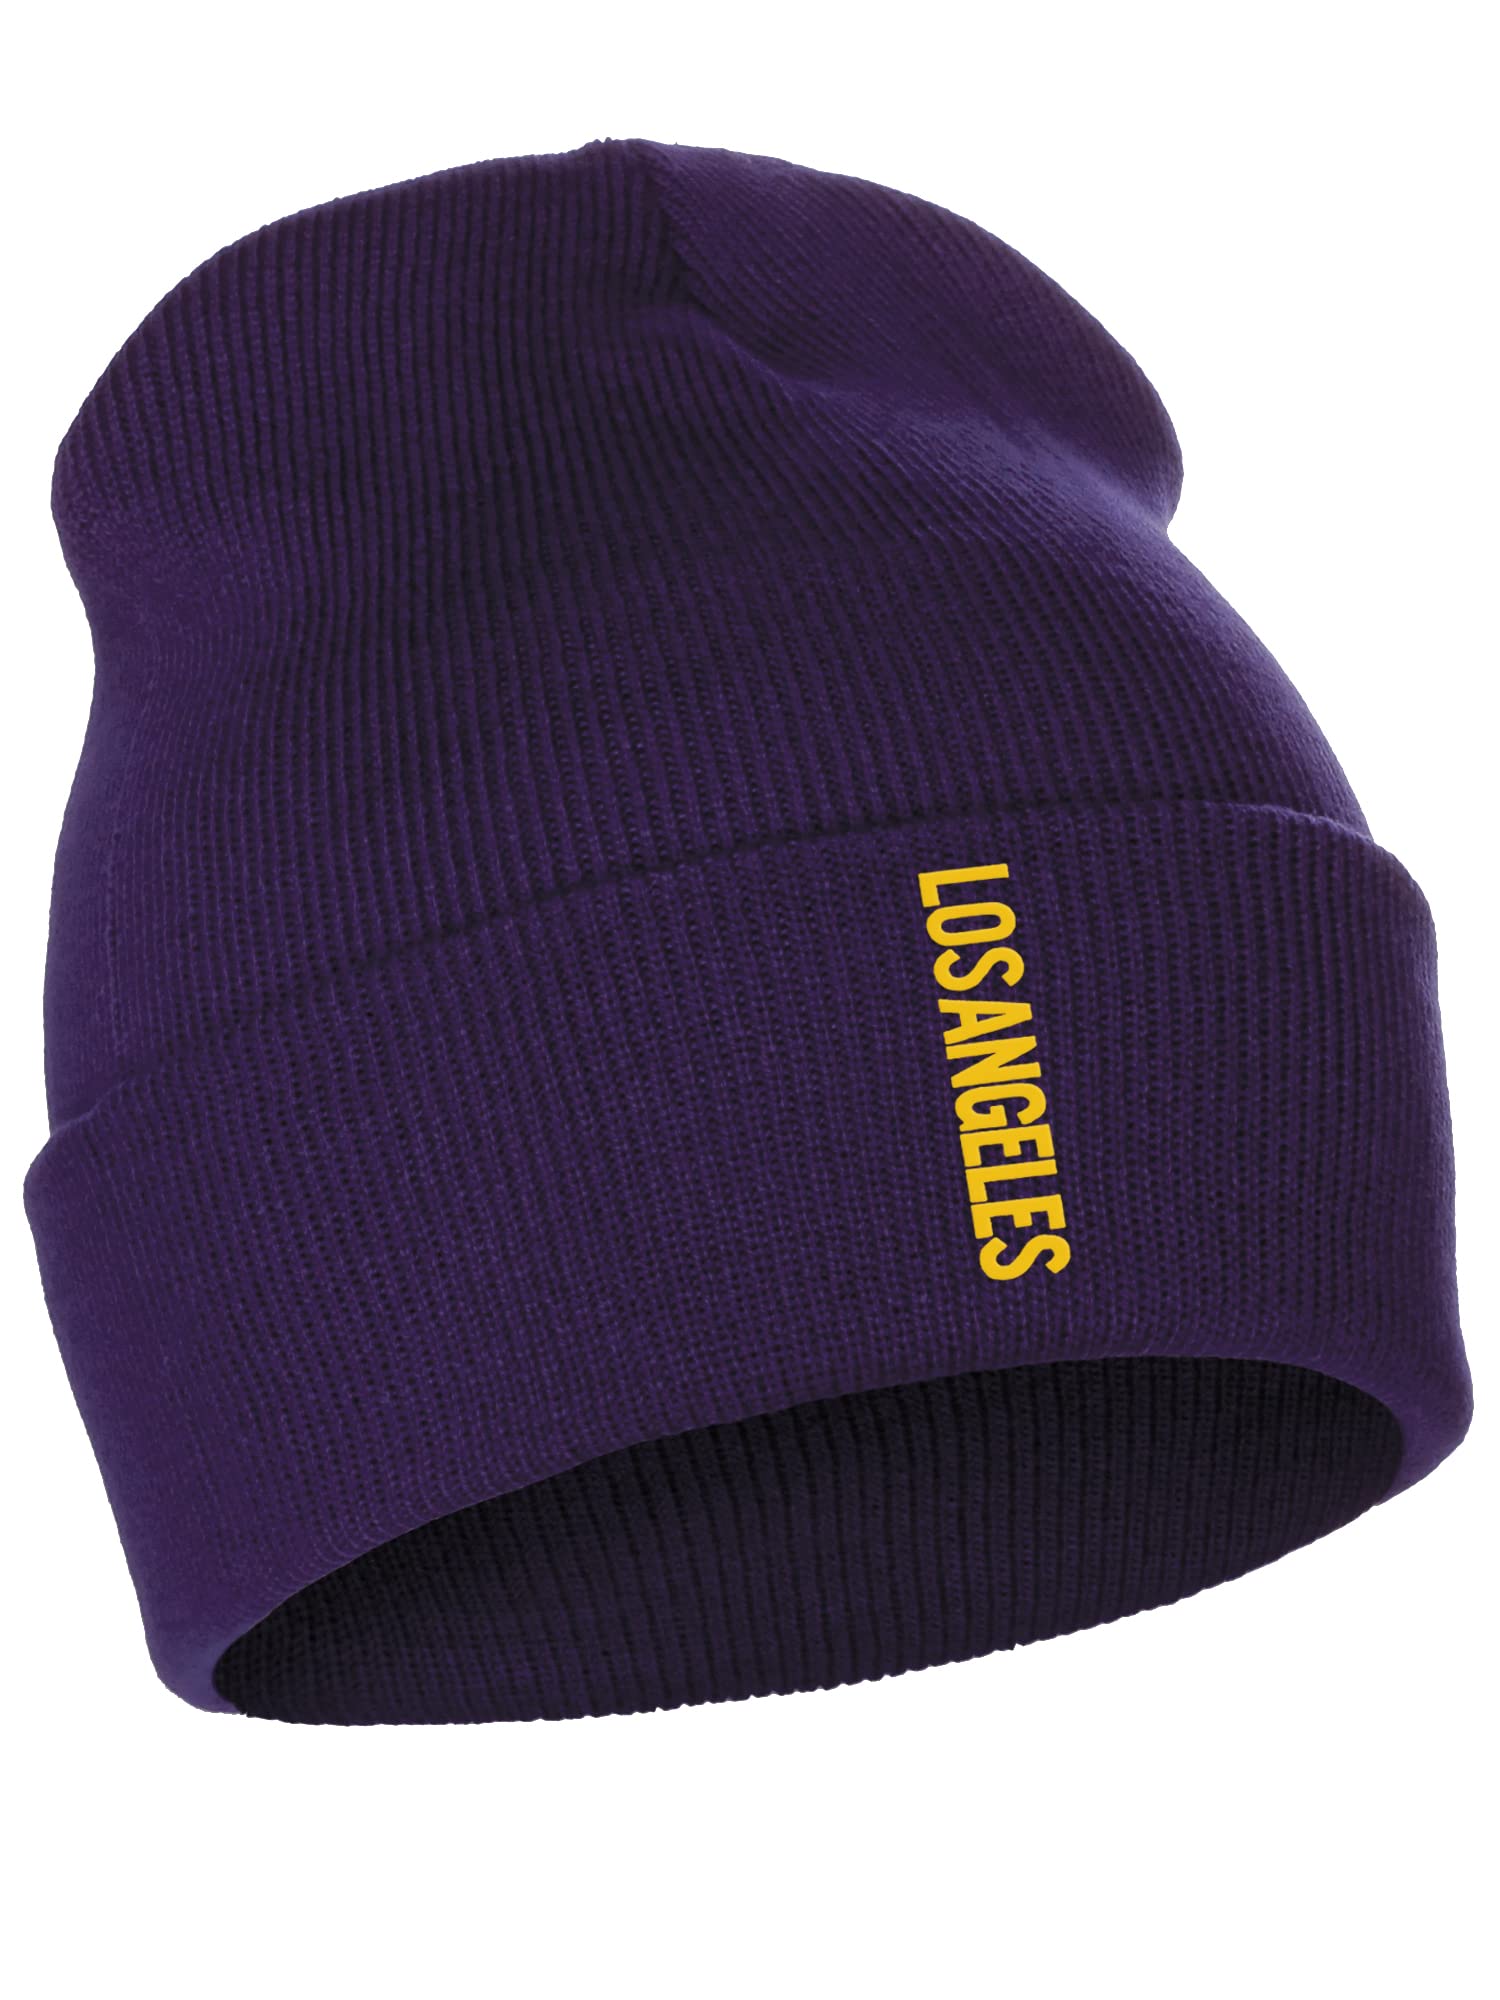 Daxton Vertical Usa Cities Cuffed Beanie Winter Knit Hat Skully Cap, Los Angeles Purple Gold